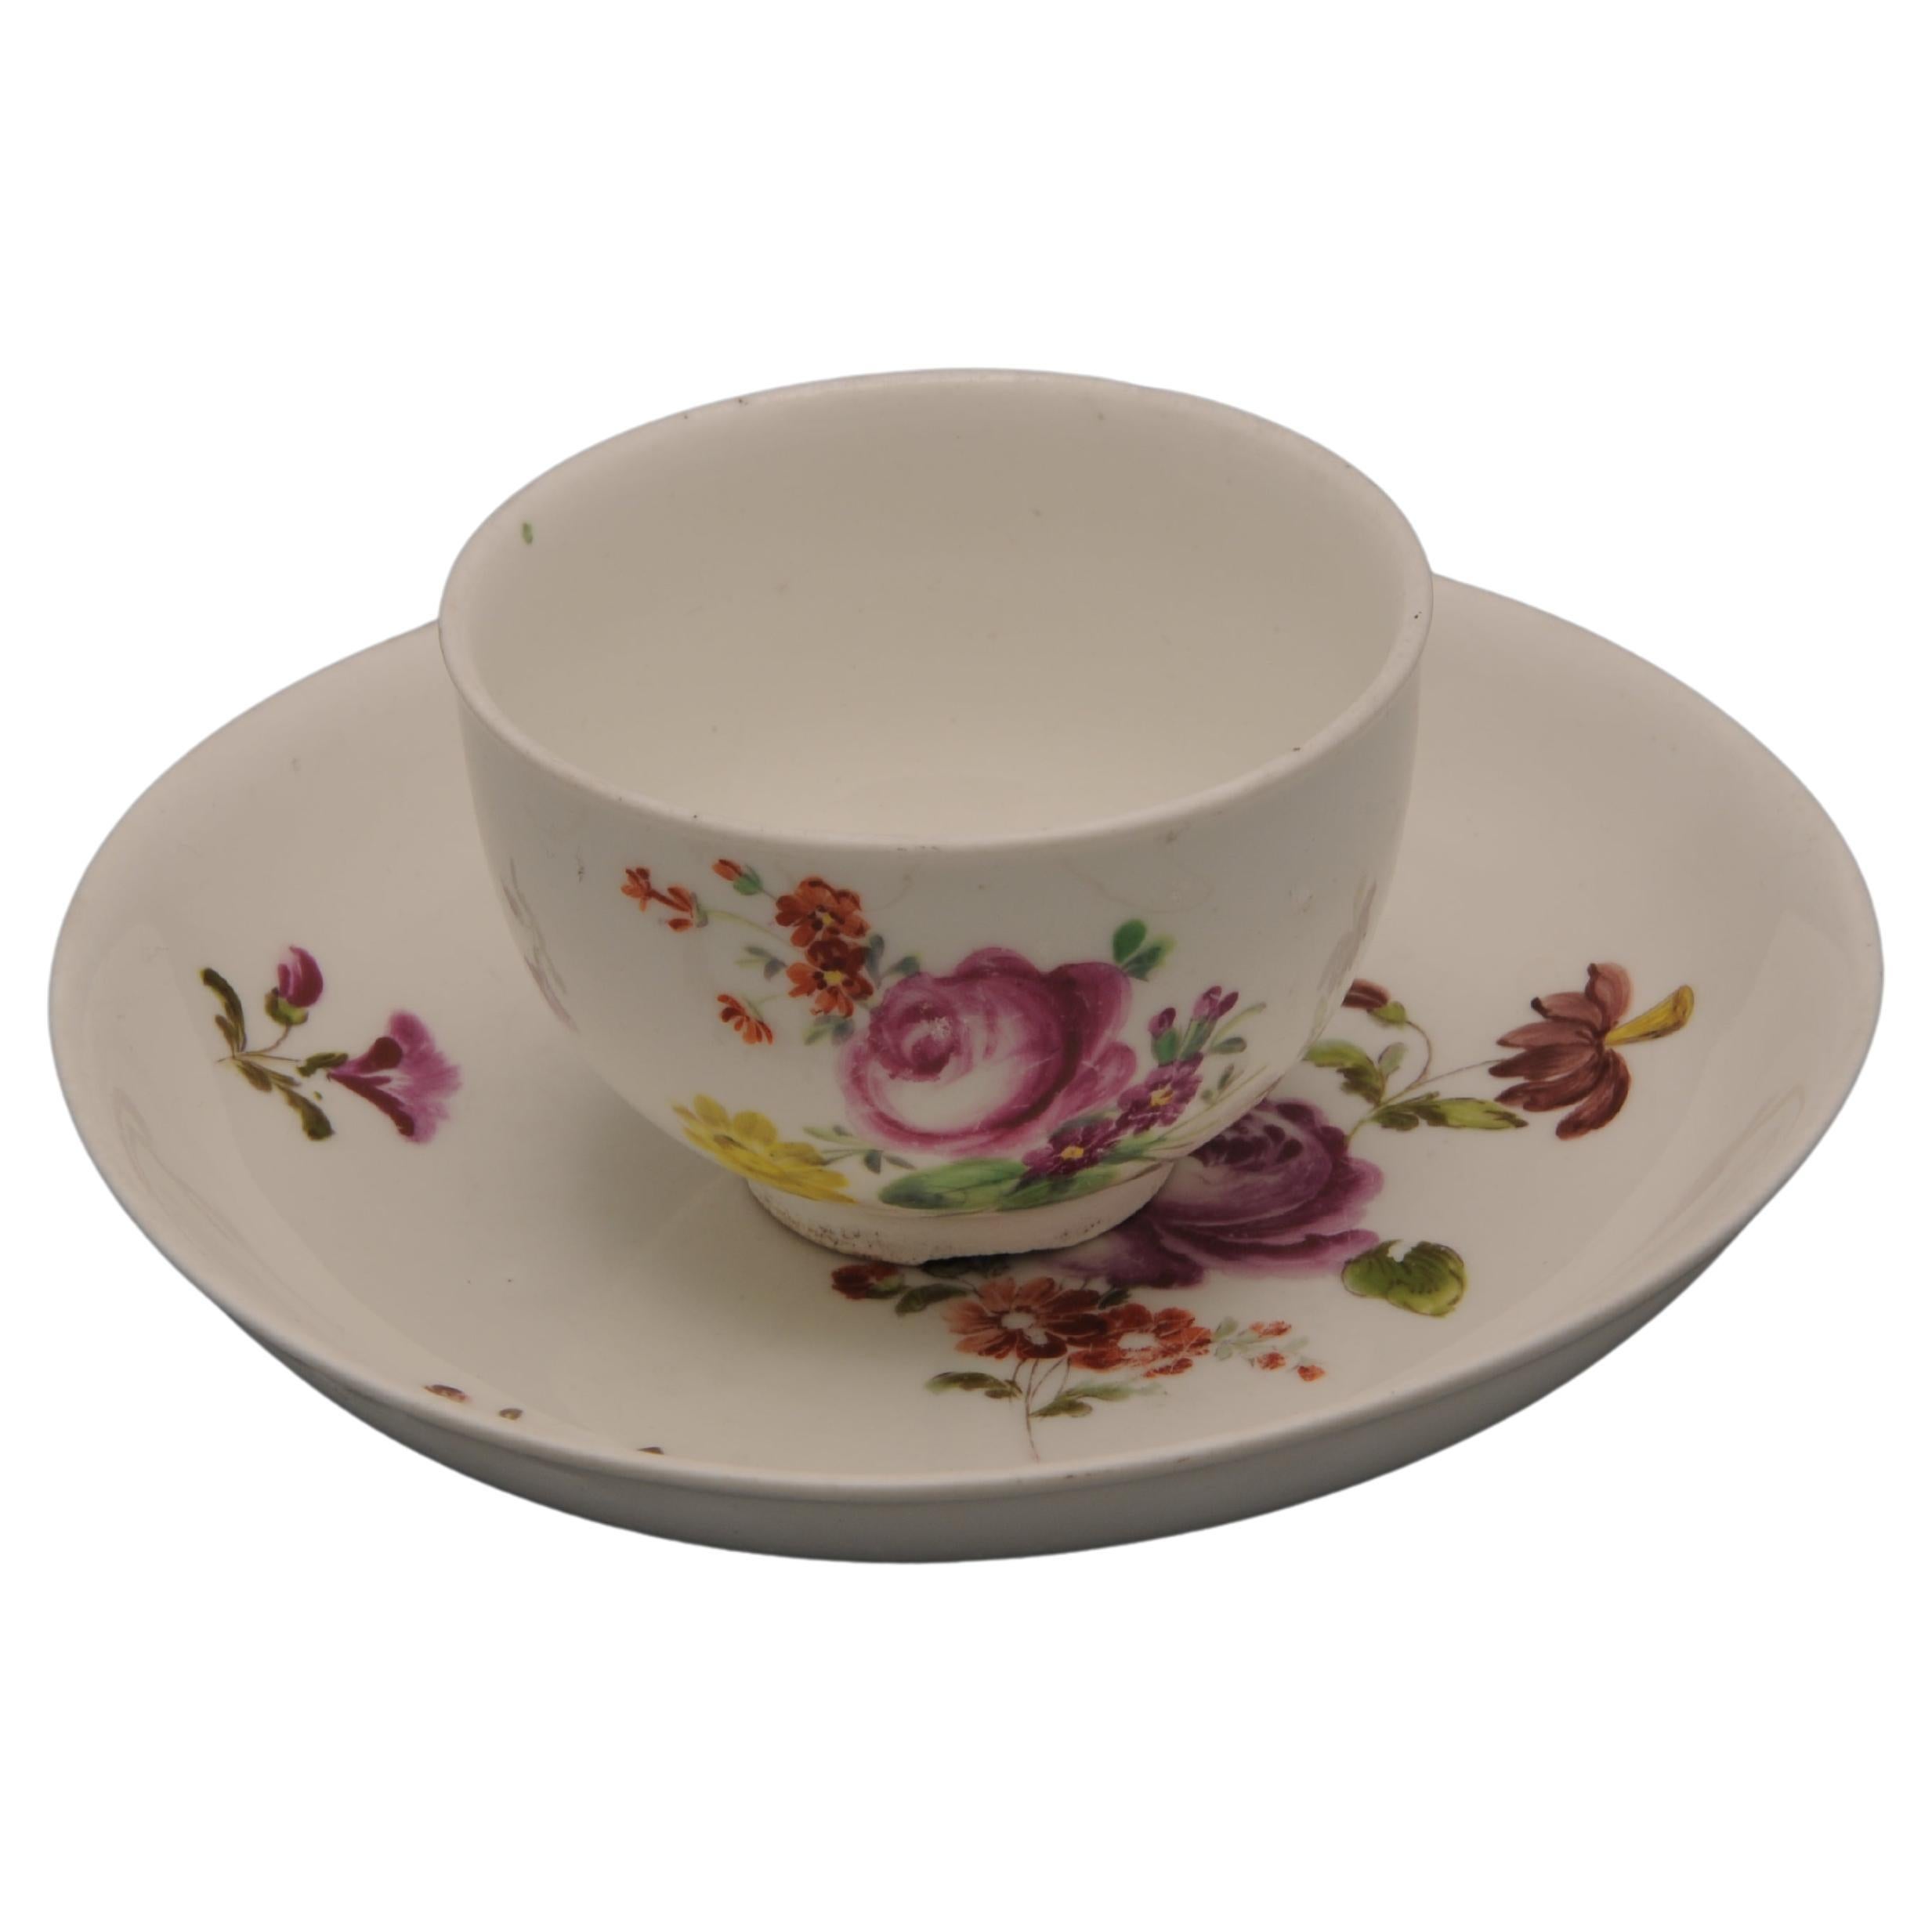 Vienna Porcelain - Rococo Cup and Saucer, late 18th century For Sale